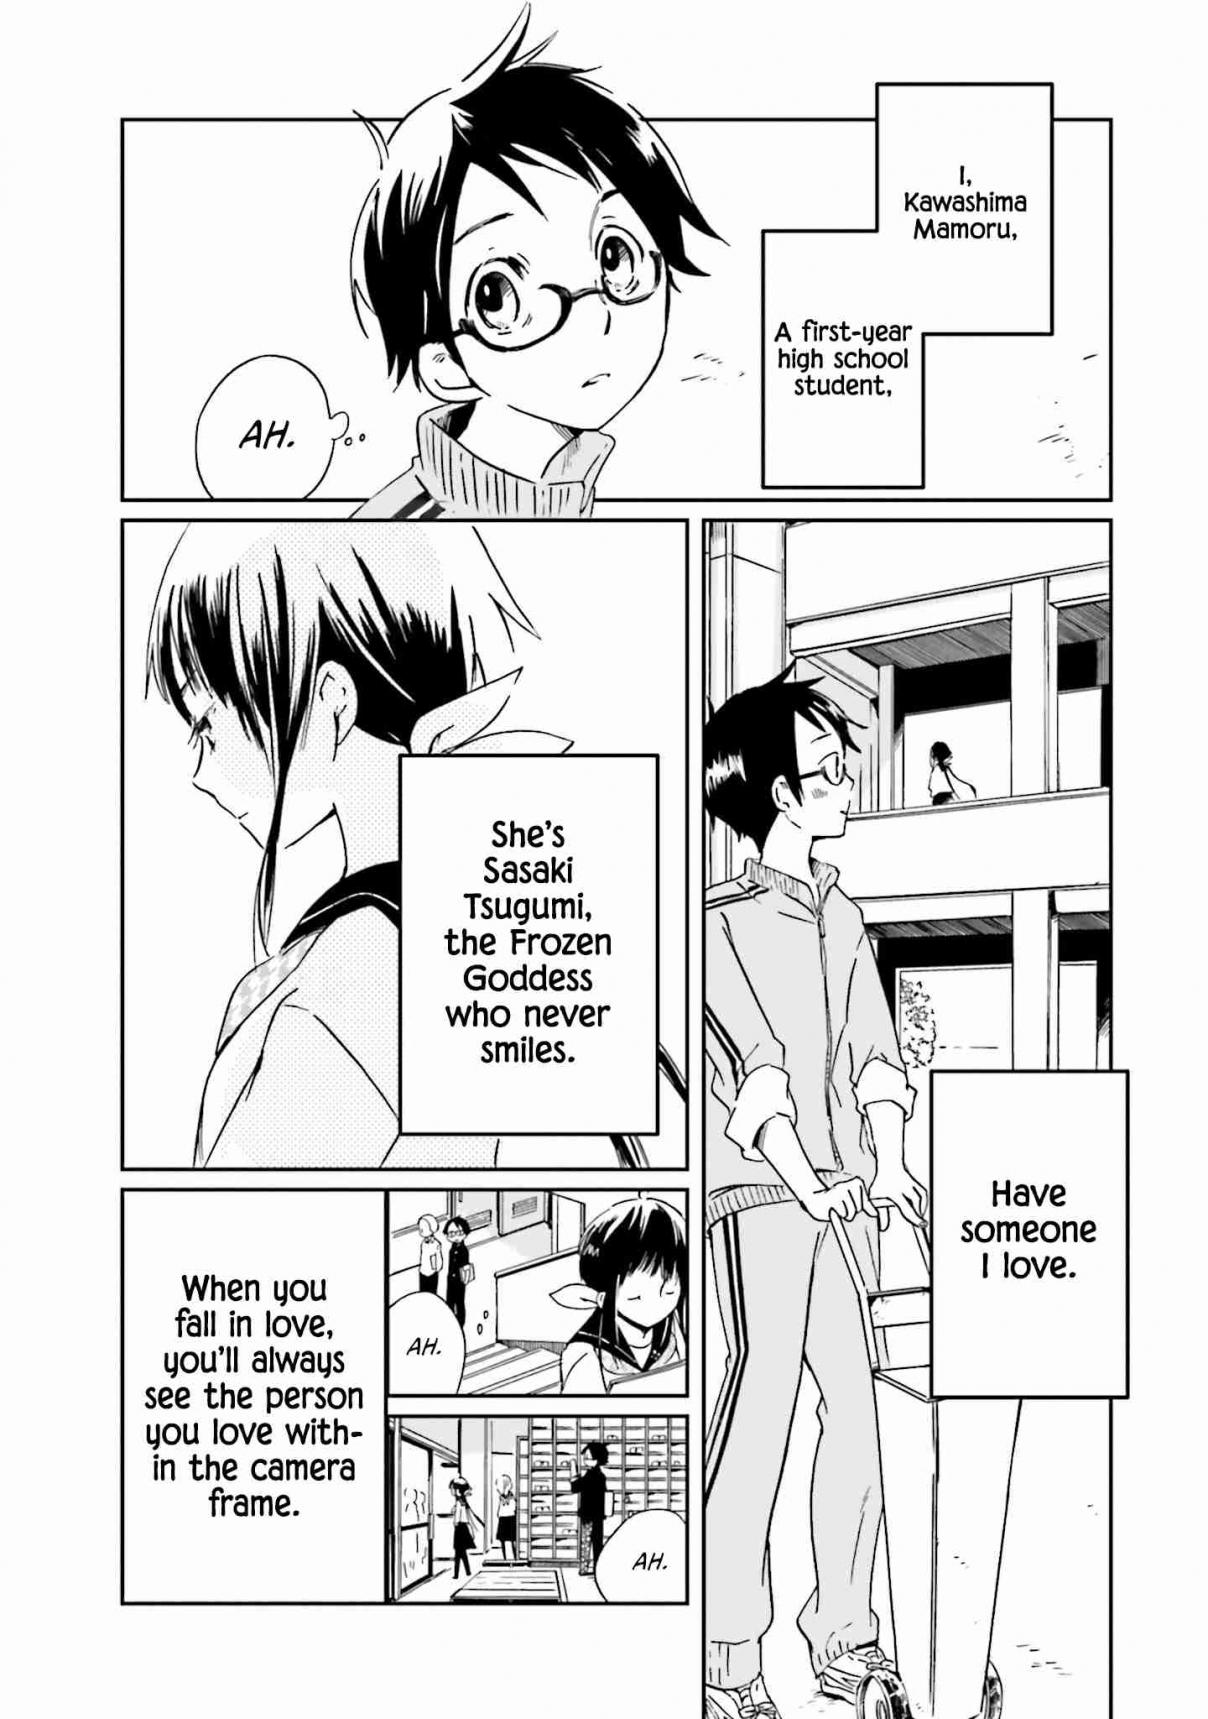 How to Capture Love Vol. 1 Ch. 3